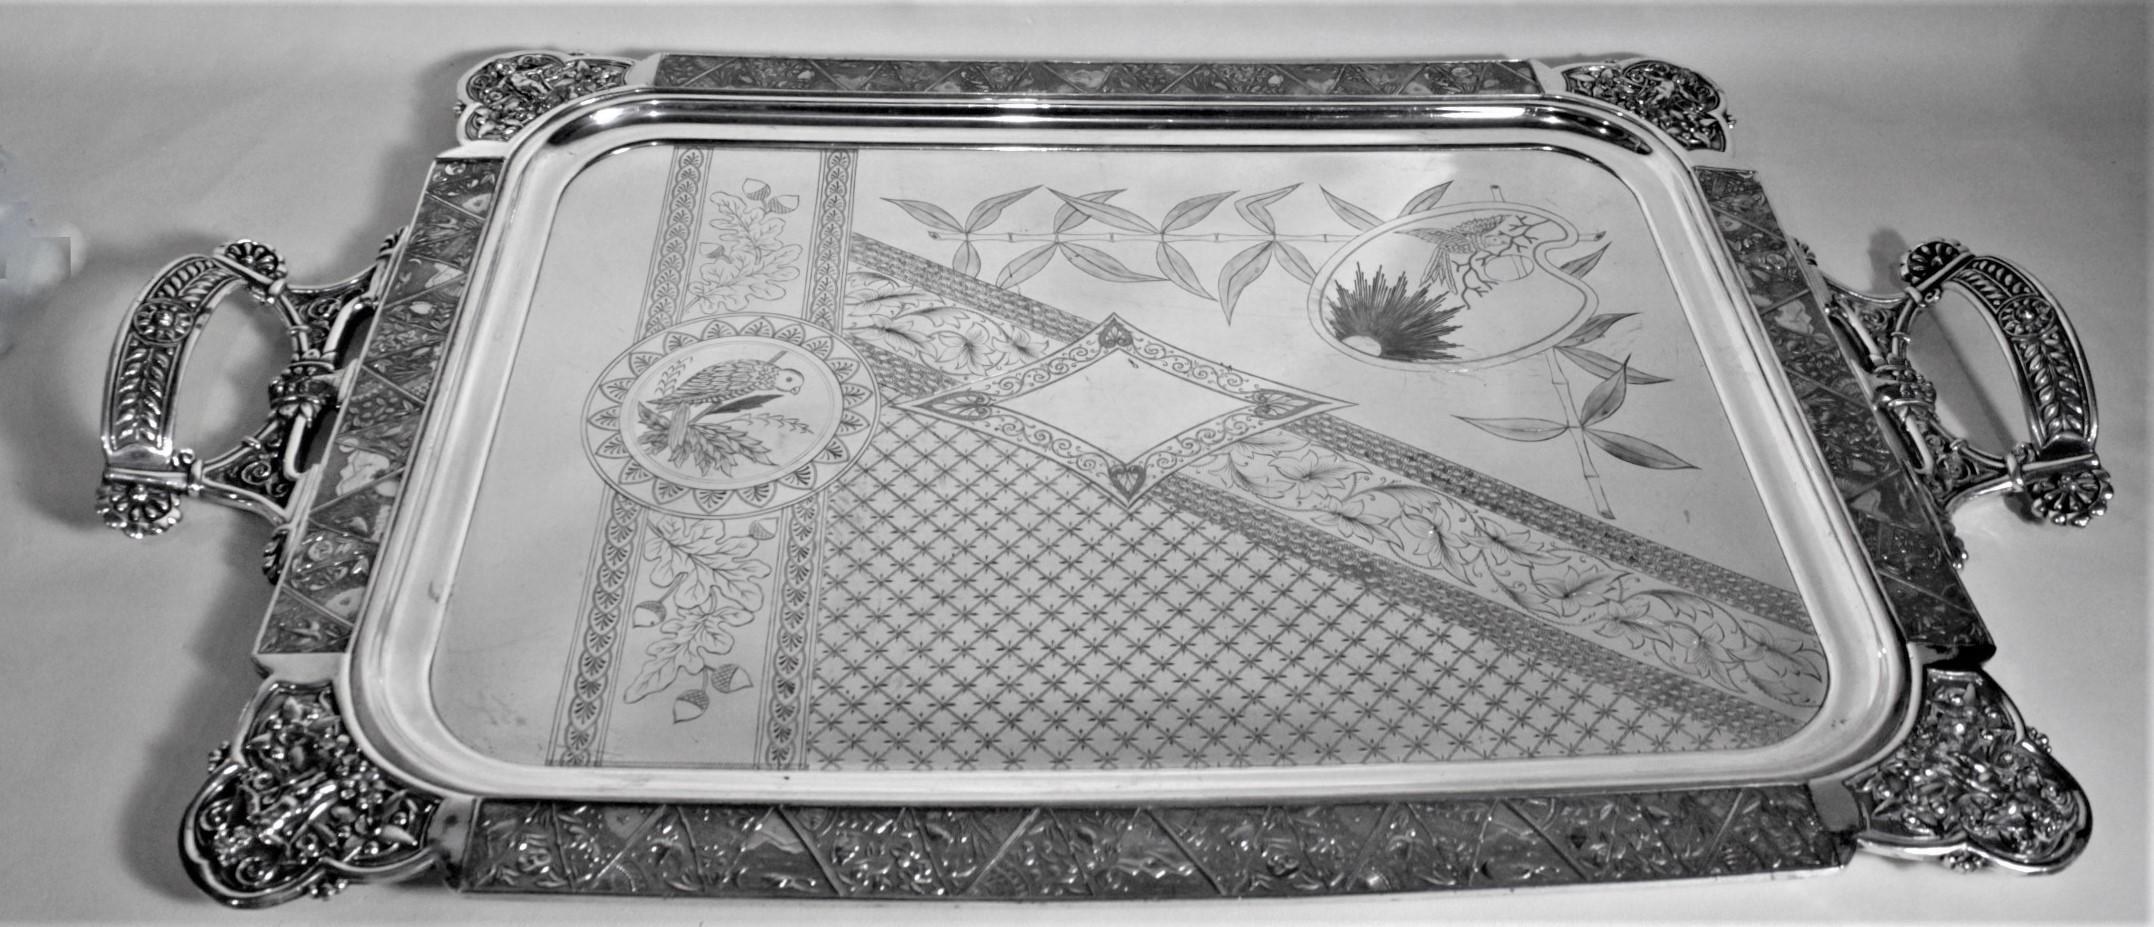 This extremely large and substantial silver plated serving tray remarkably unsigned, but believed to have been made in the United States in circa 1890 in the period Aesthetic Movement style. This tray is extremely ornately decorated from the casting